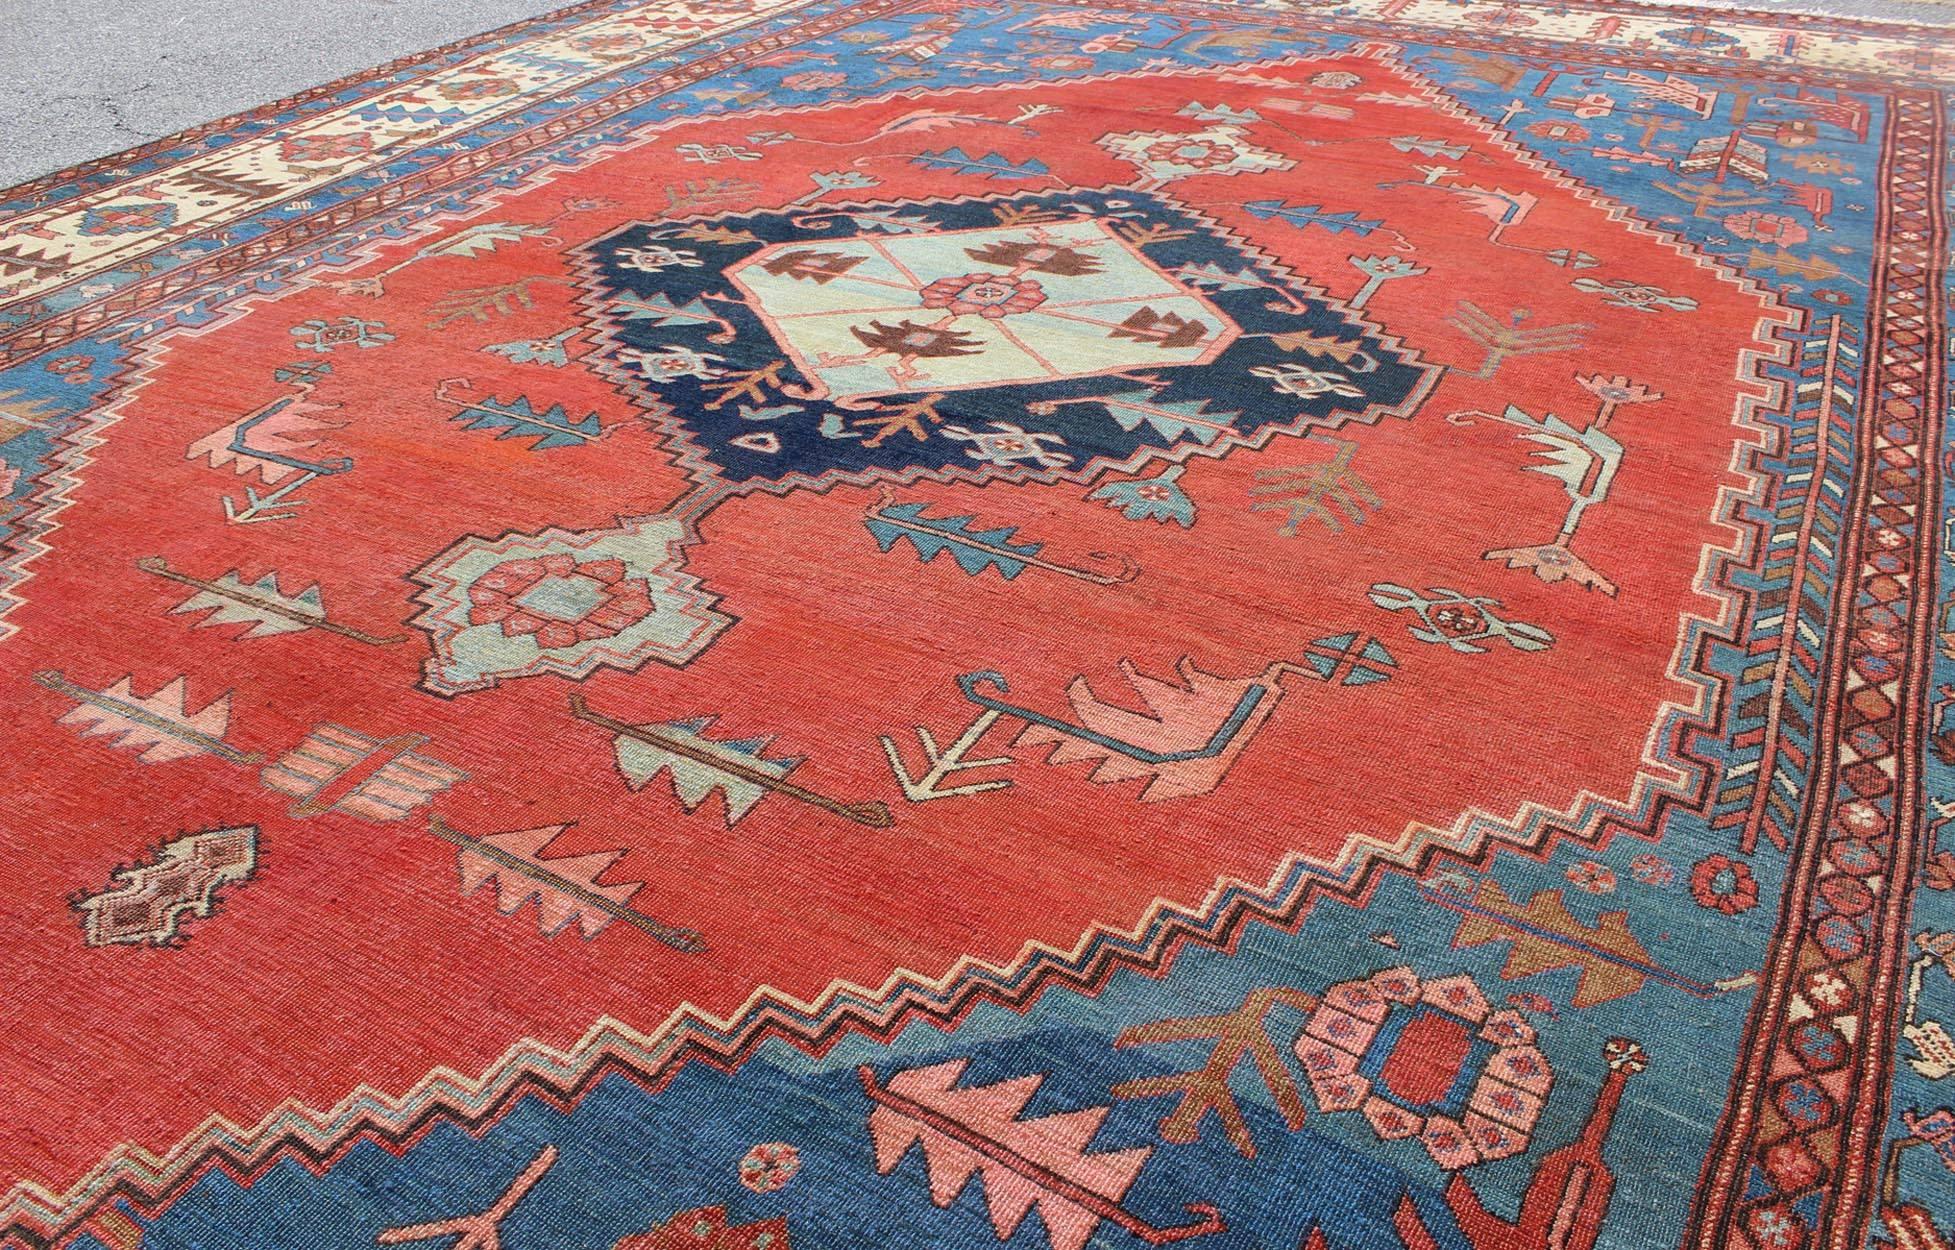 Antique Persian Large Bakshaish Serapi Rug in Brick Red, Royal Blue and Ivory In Good Condition For Sale In Atlanta, GA